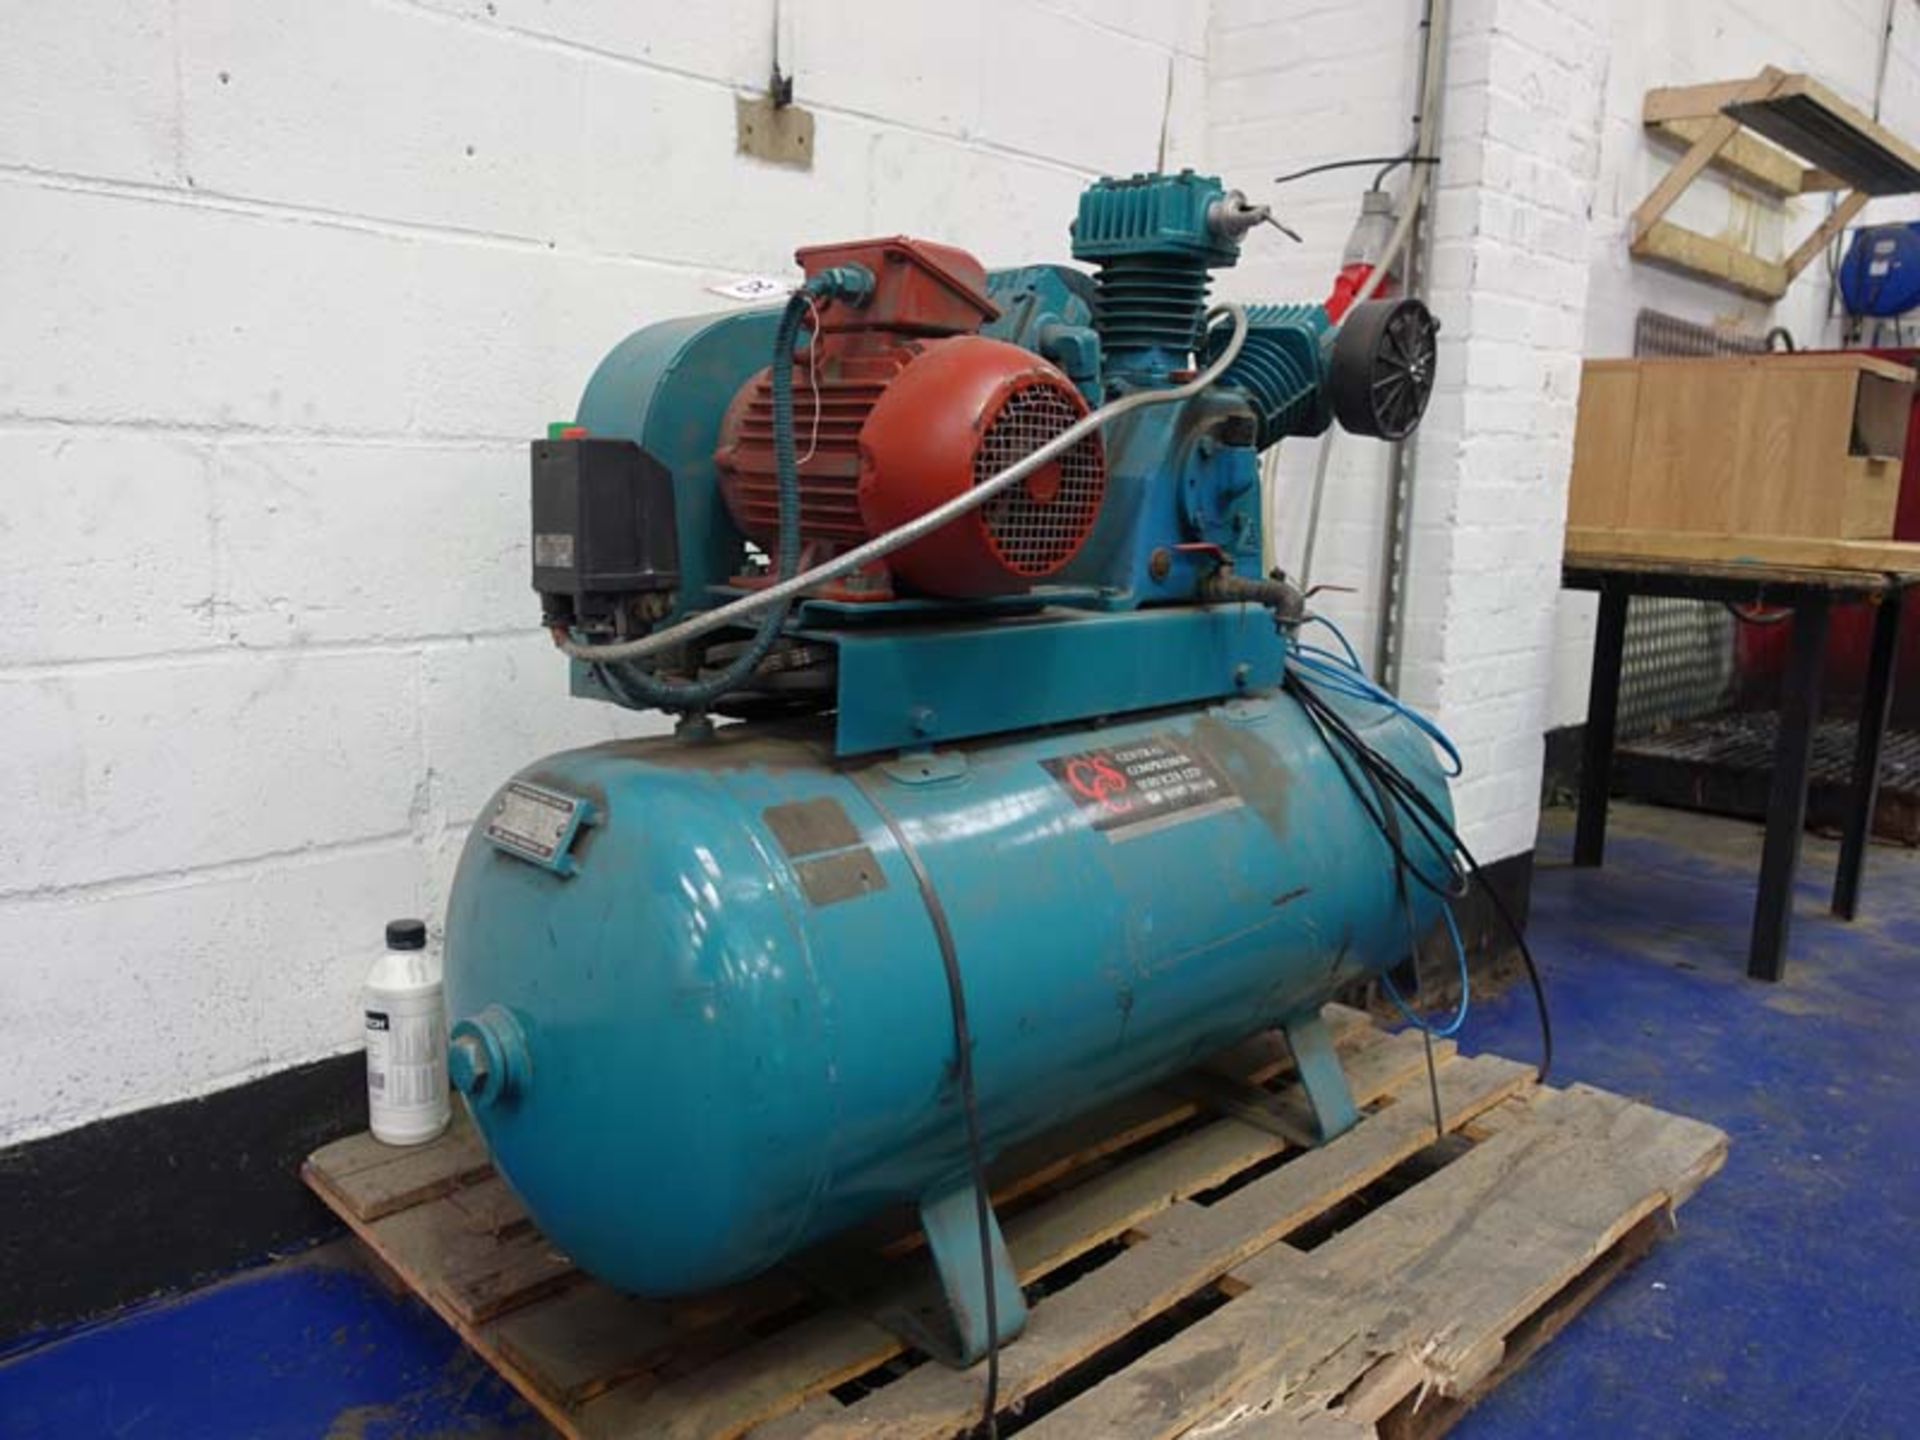 CCS receiver mounter air compressor with 3 phase motor